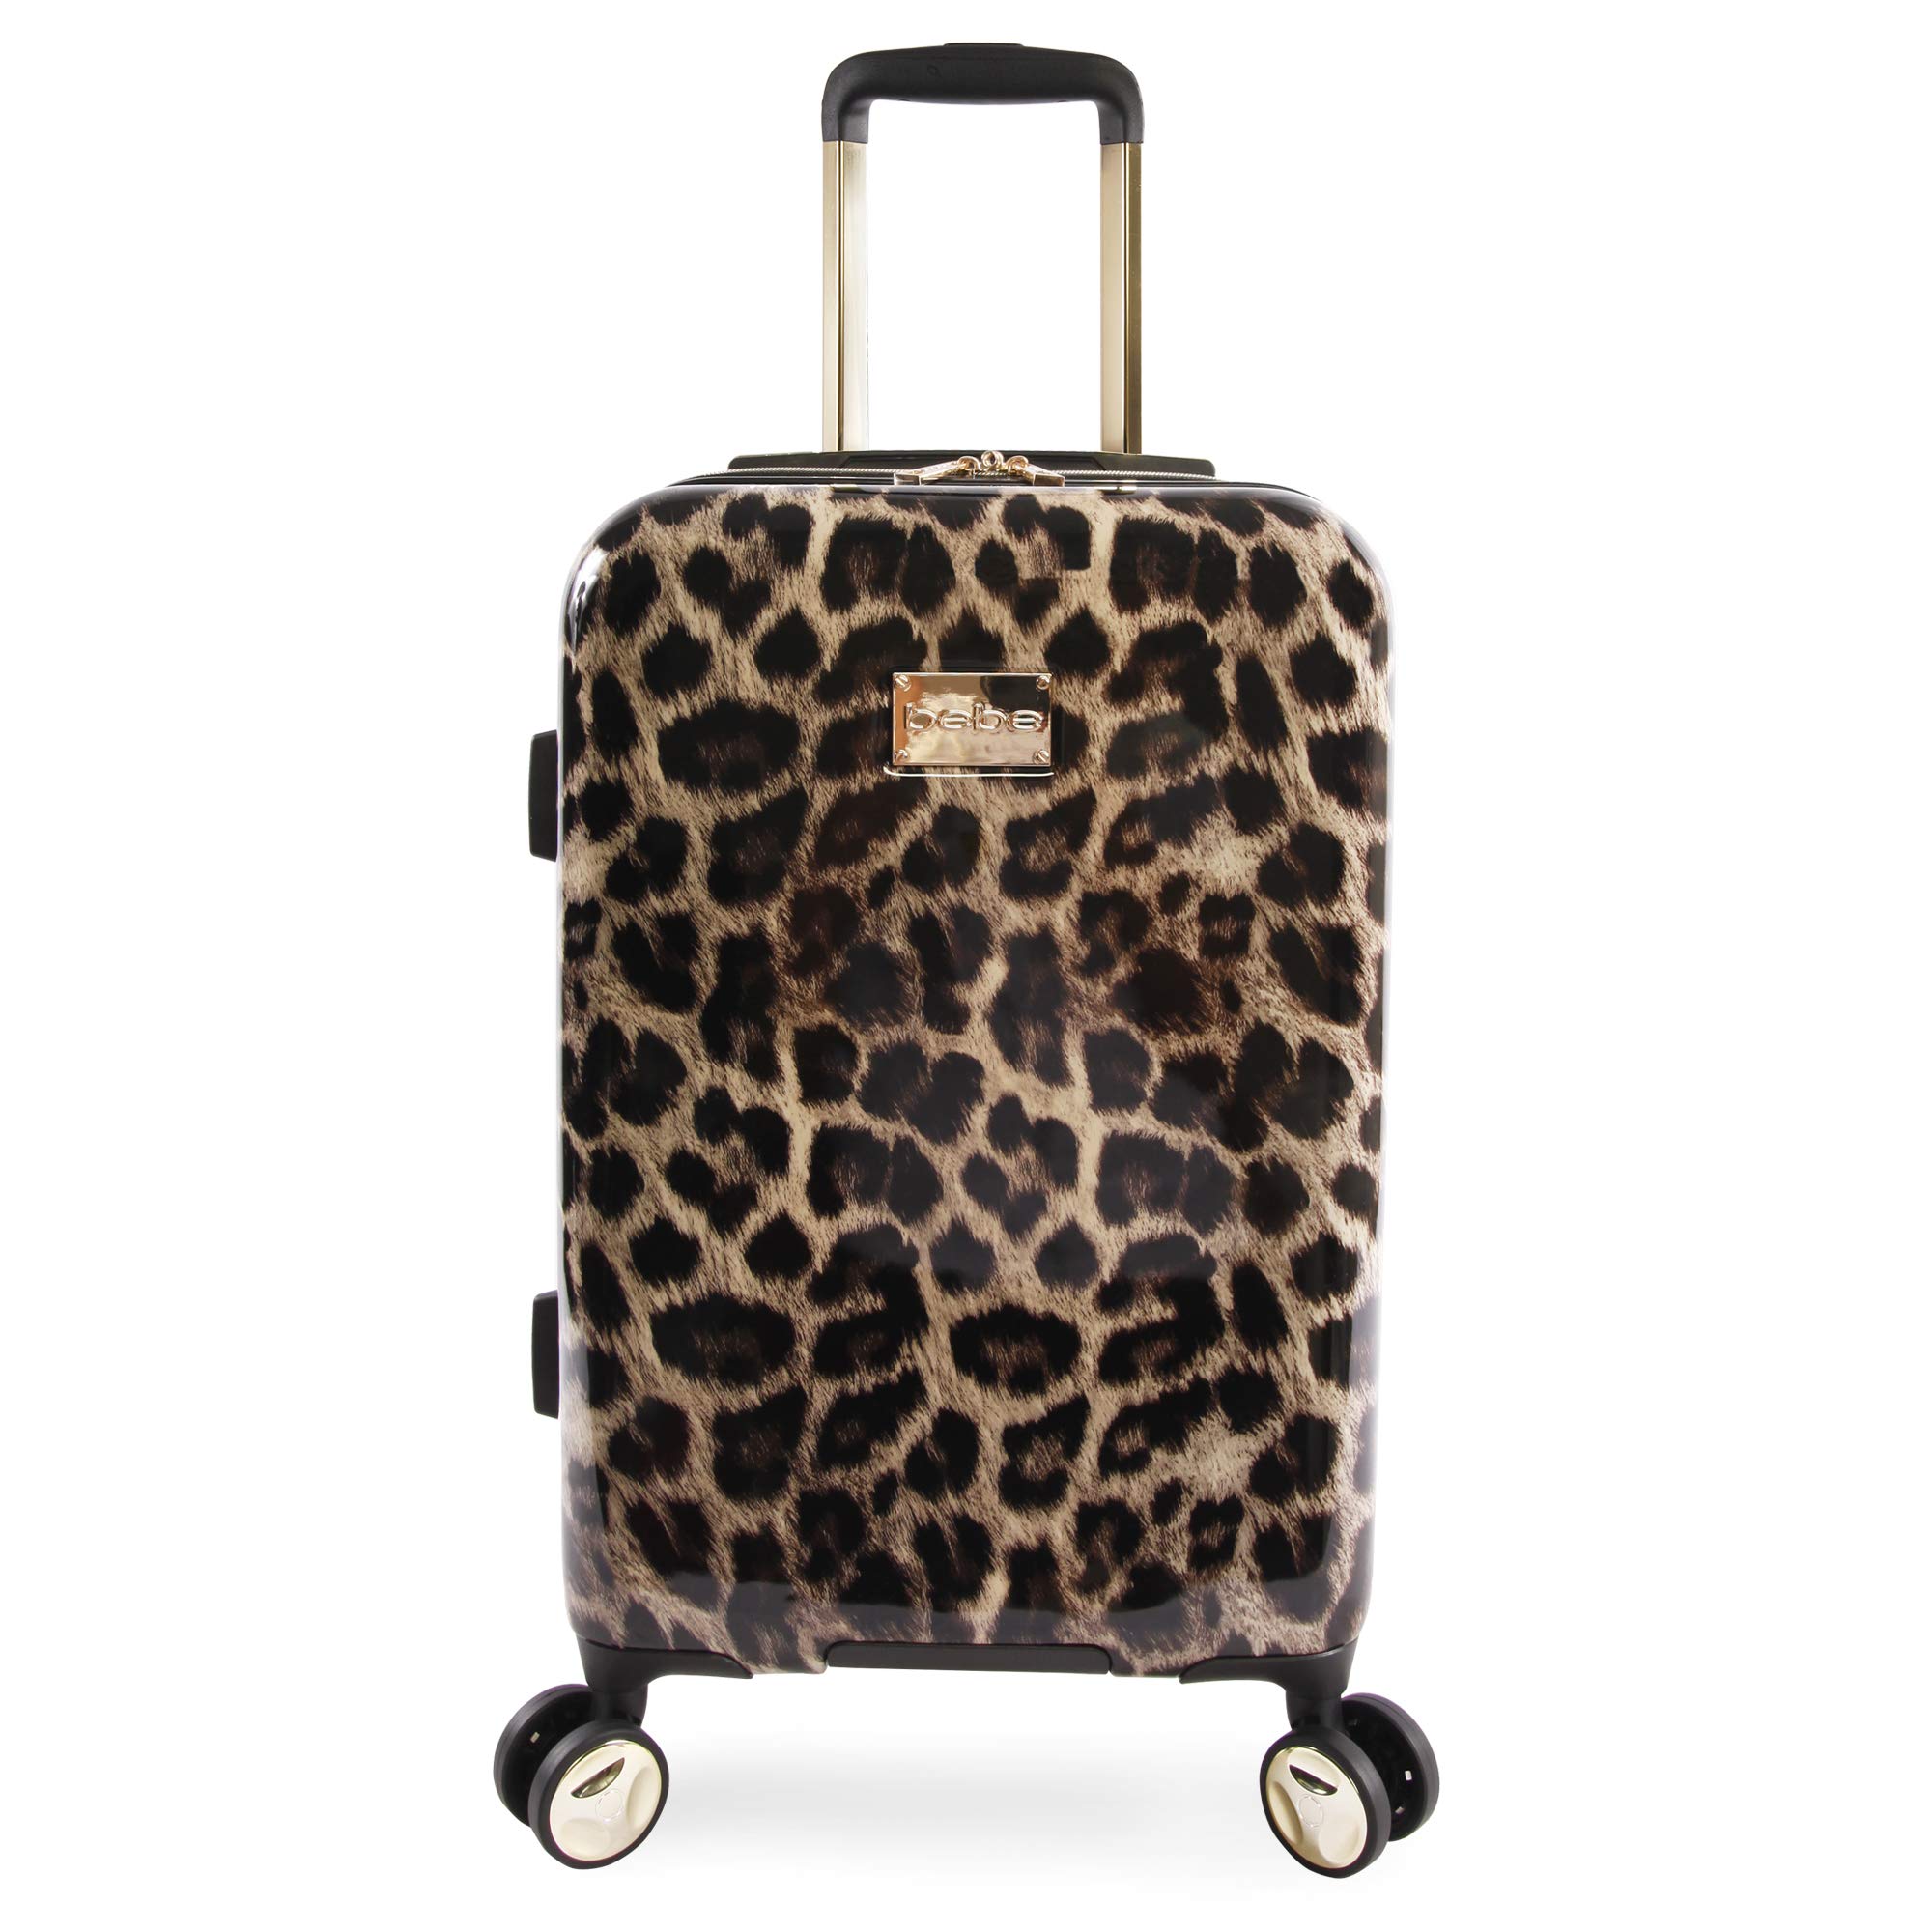 BEBE Womens Adriana 21 Hardside carry-on Spinner Luggage, Leopard, One Size